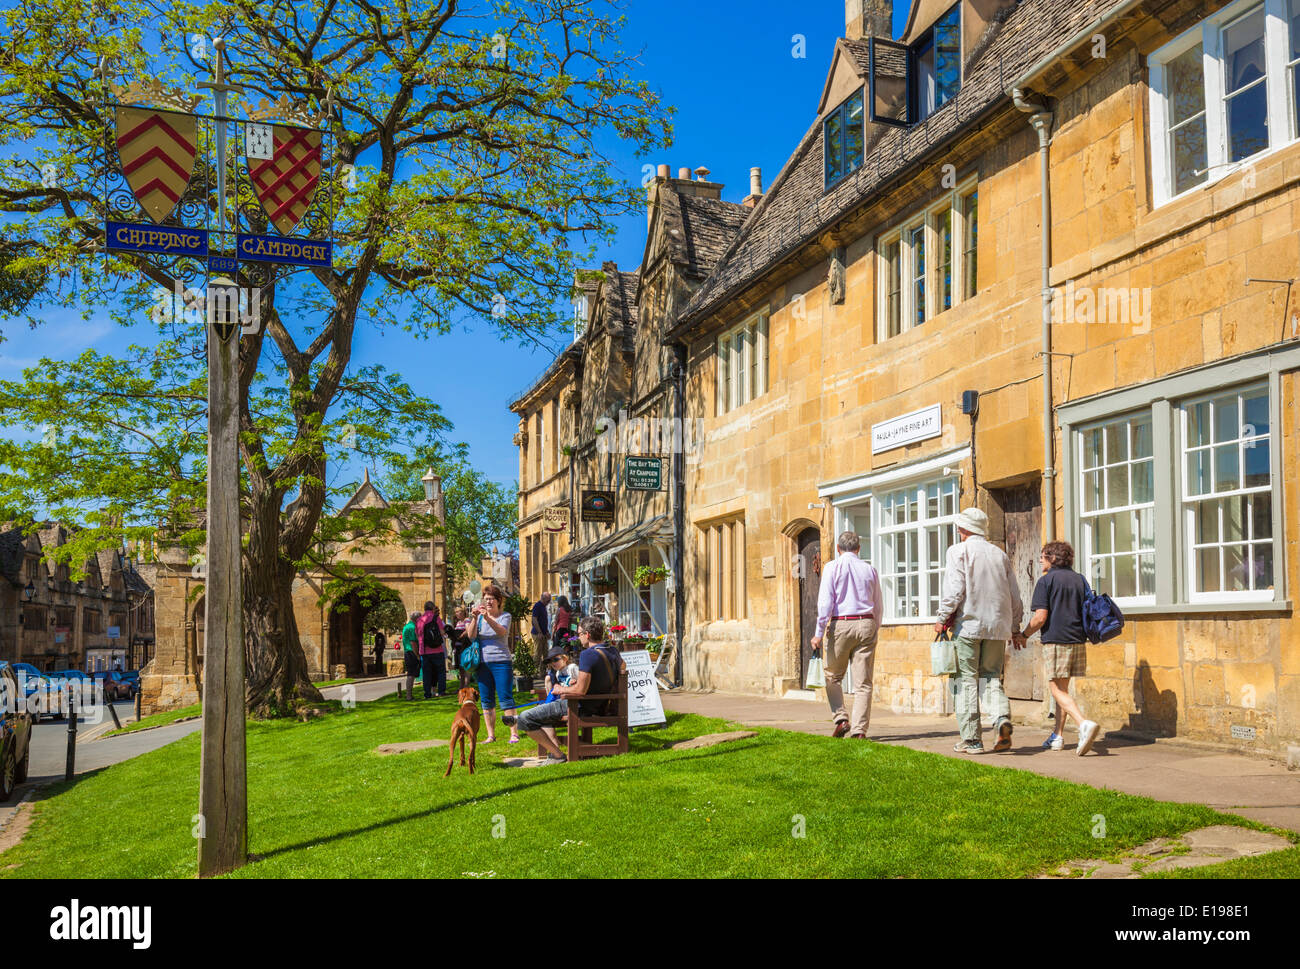 Chipping Campden High Street, Chipping Campden, The Cotswolds Gloucestershire England UK EU Europe Stock Photo